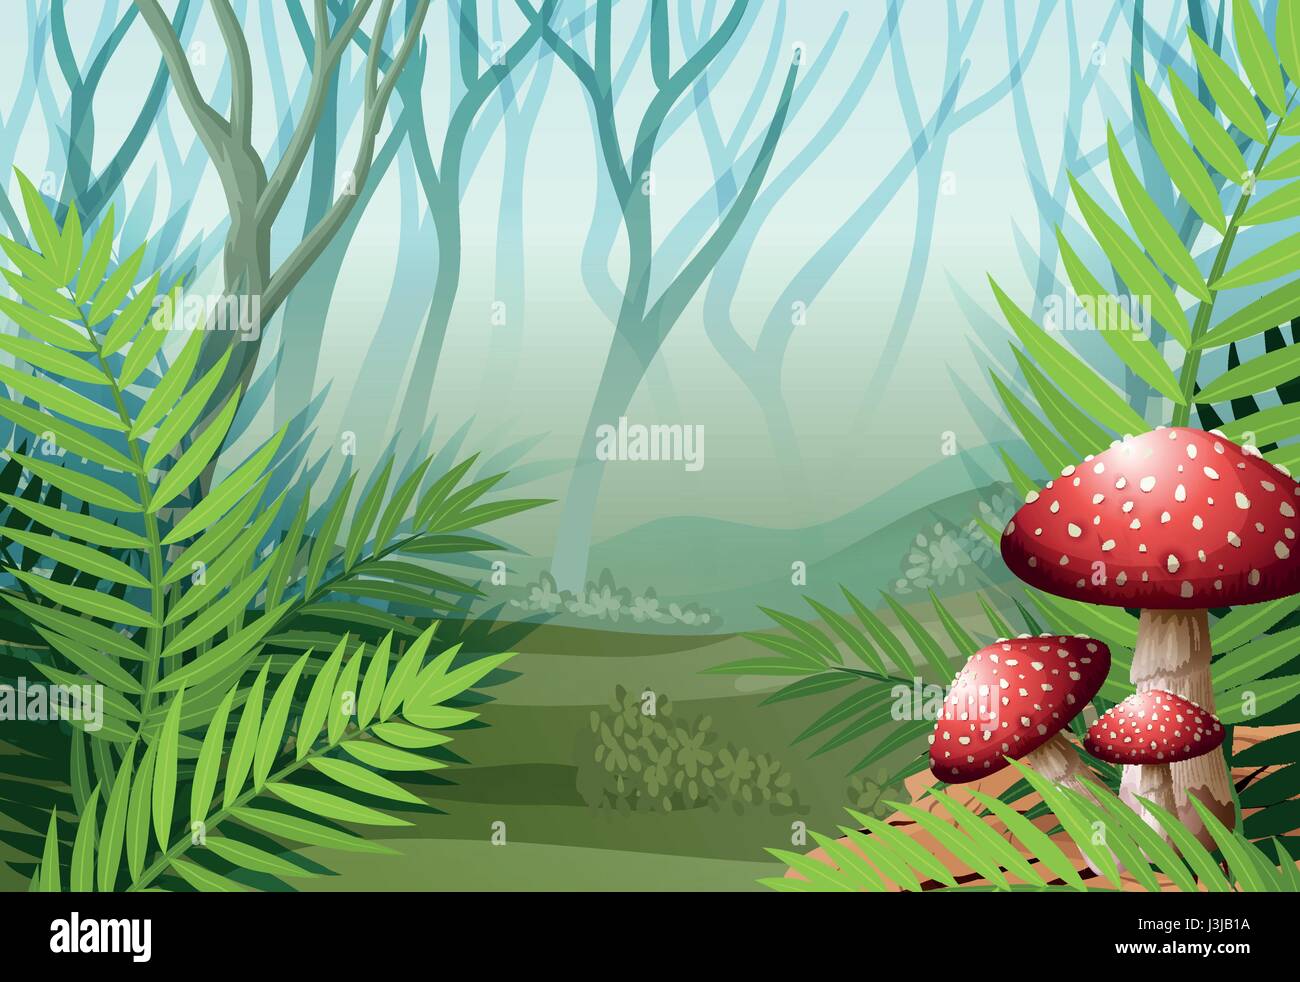 Forest scene with fog on the grass illustration Stock Vector